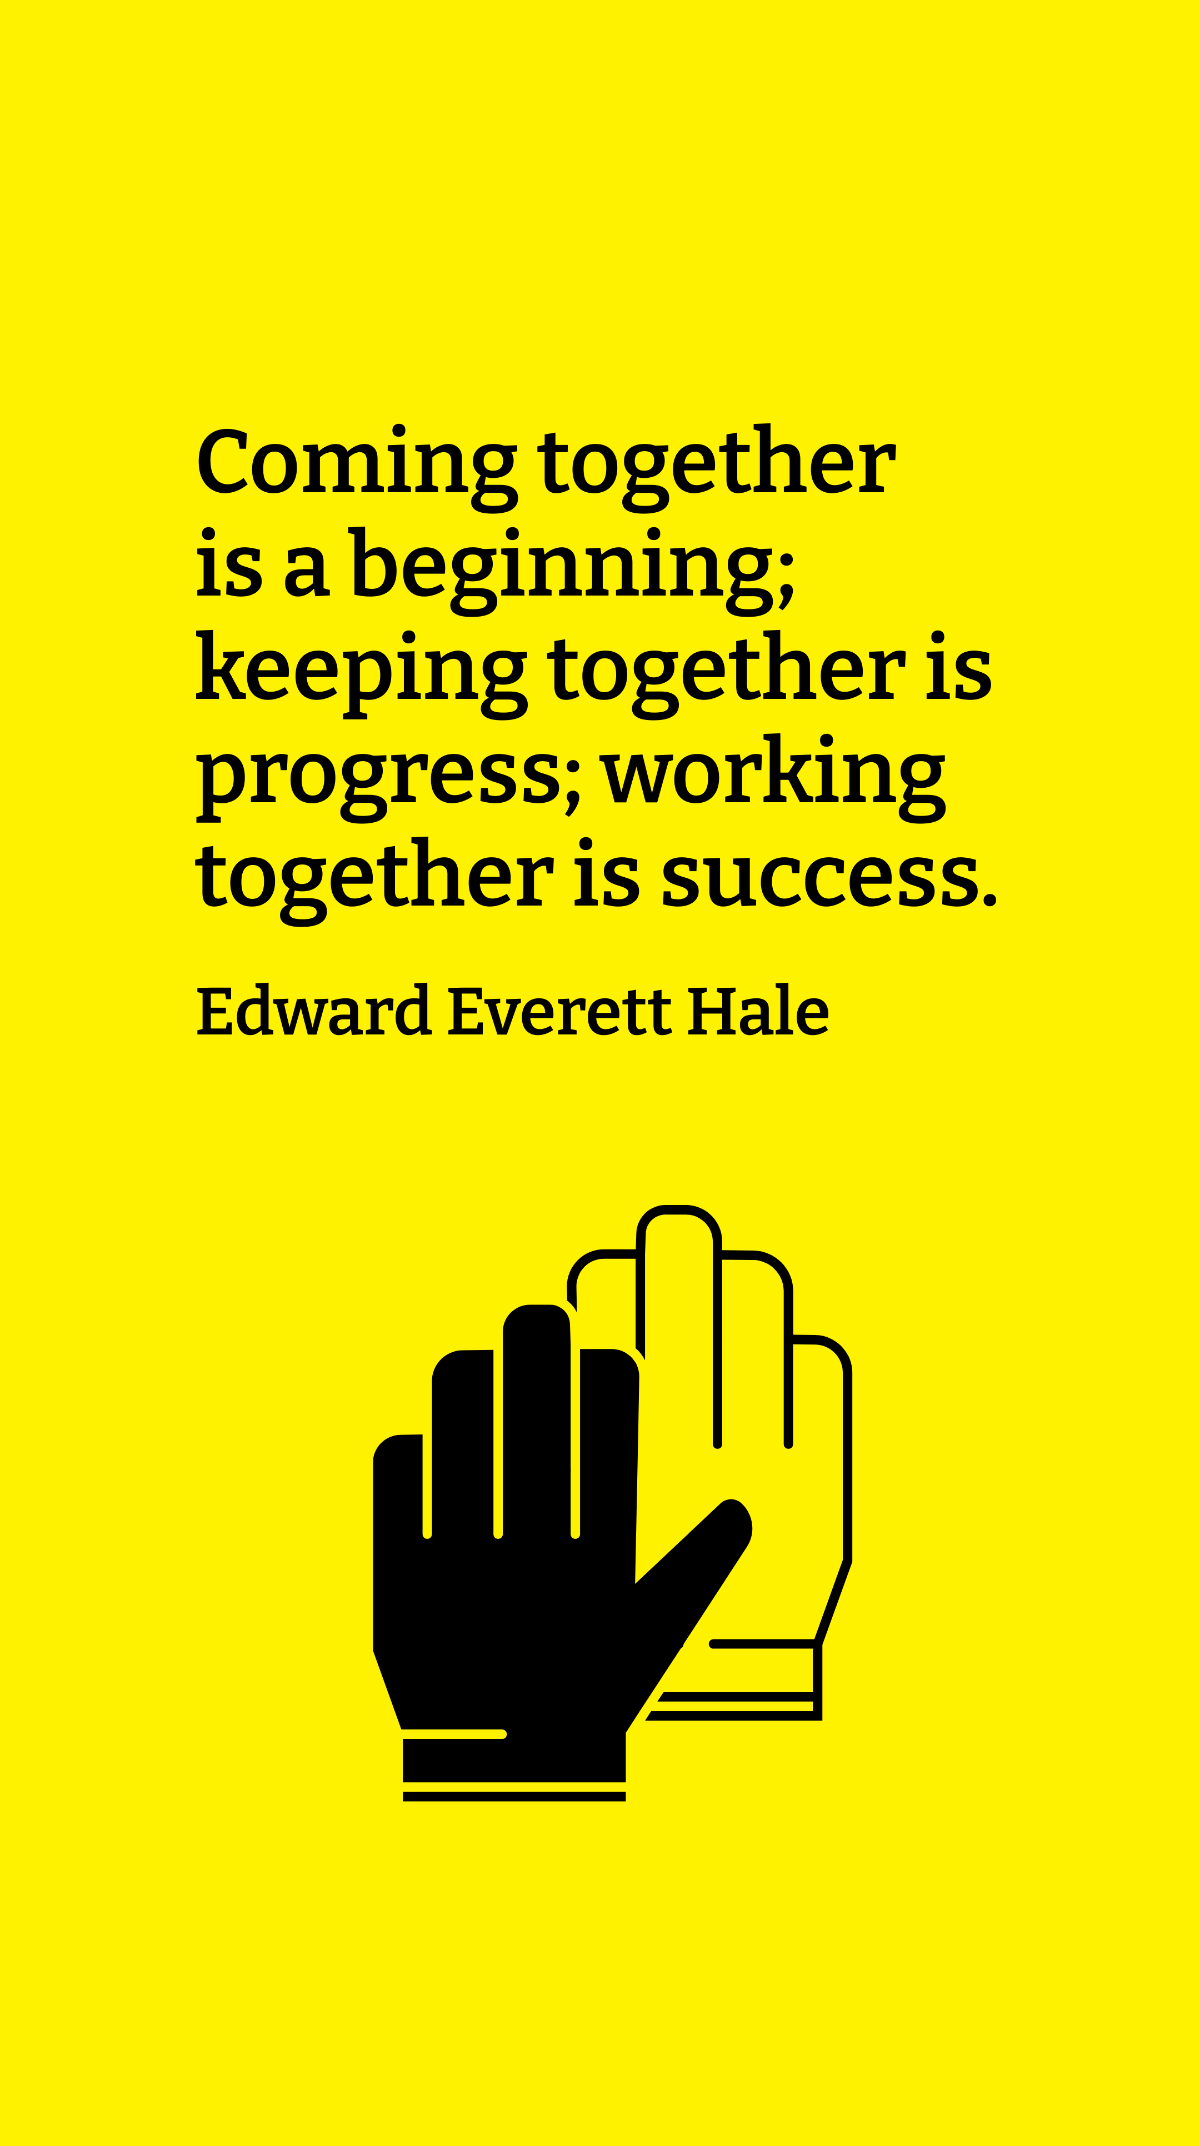 Edward Everett Hale - Coming together is a beginning; keeping together is progress; working together is success. Template